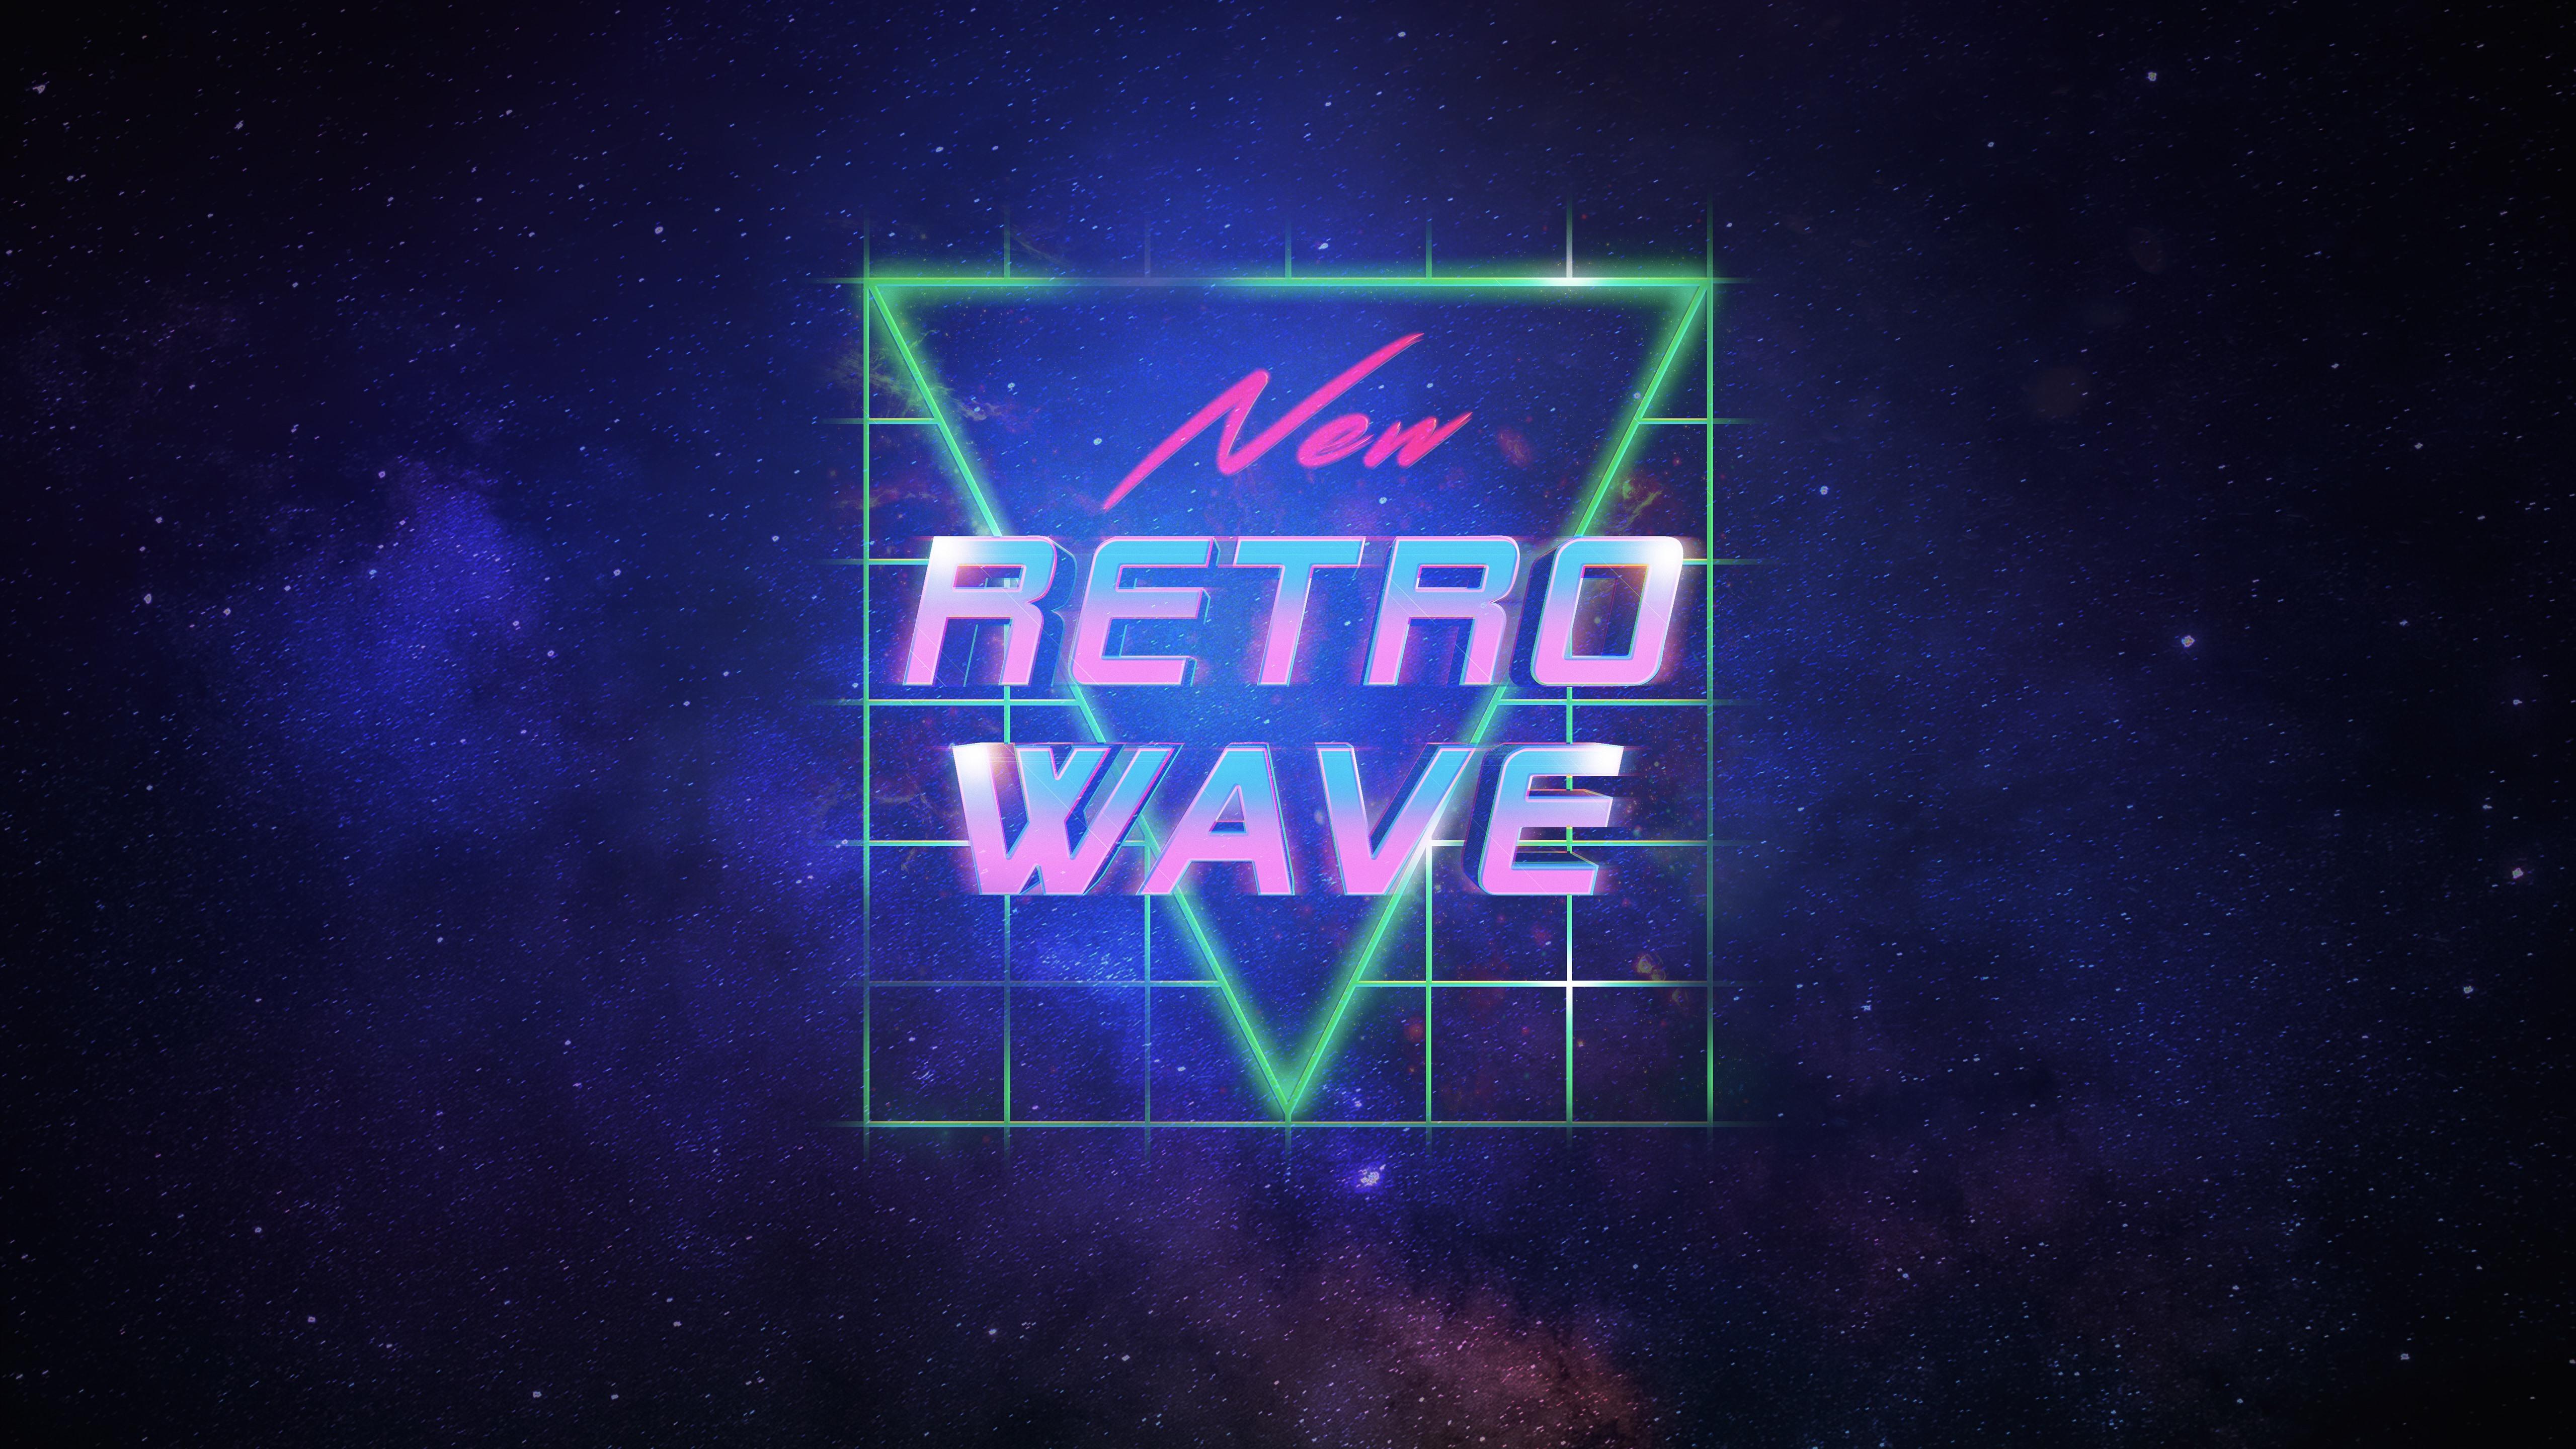 Wallpaper New Retro Wave, Synth pop 5120x2880 UHD 5K Picture